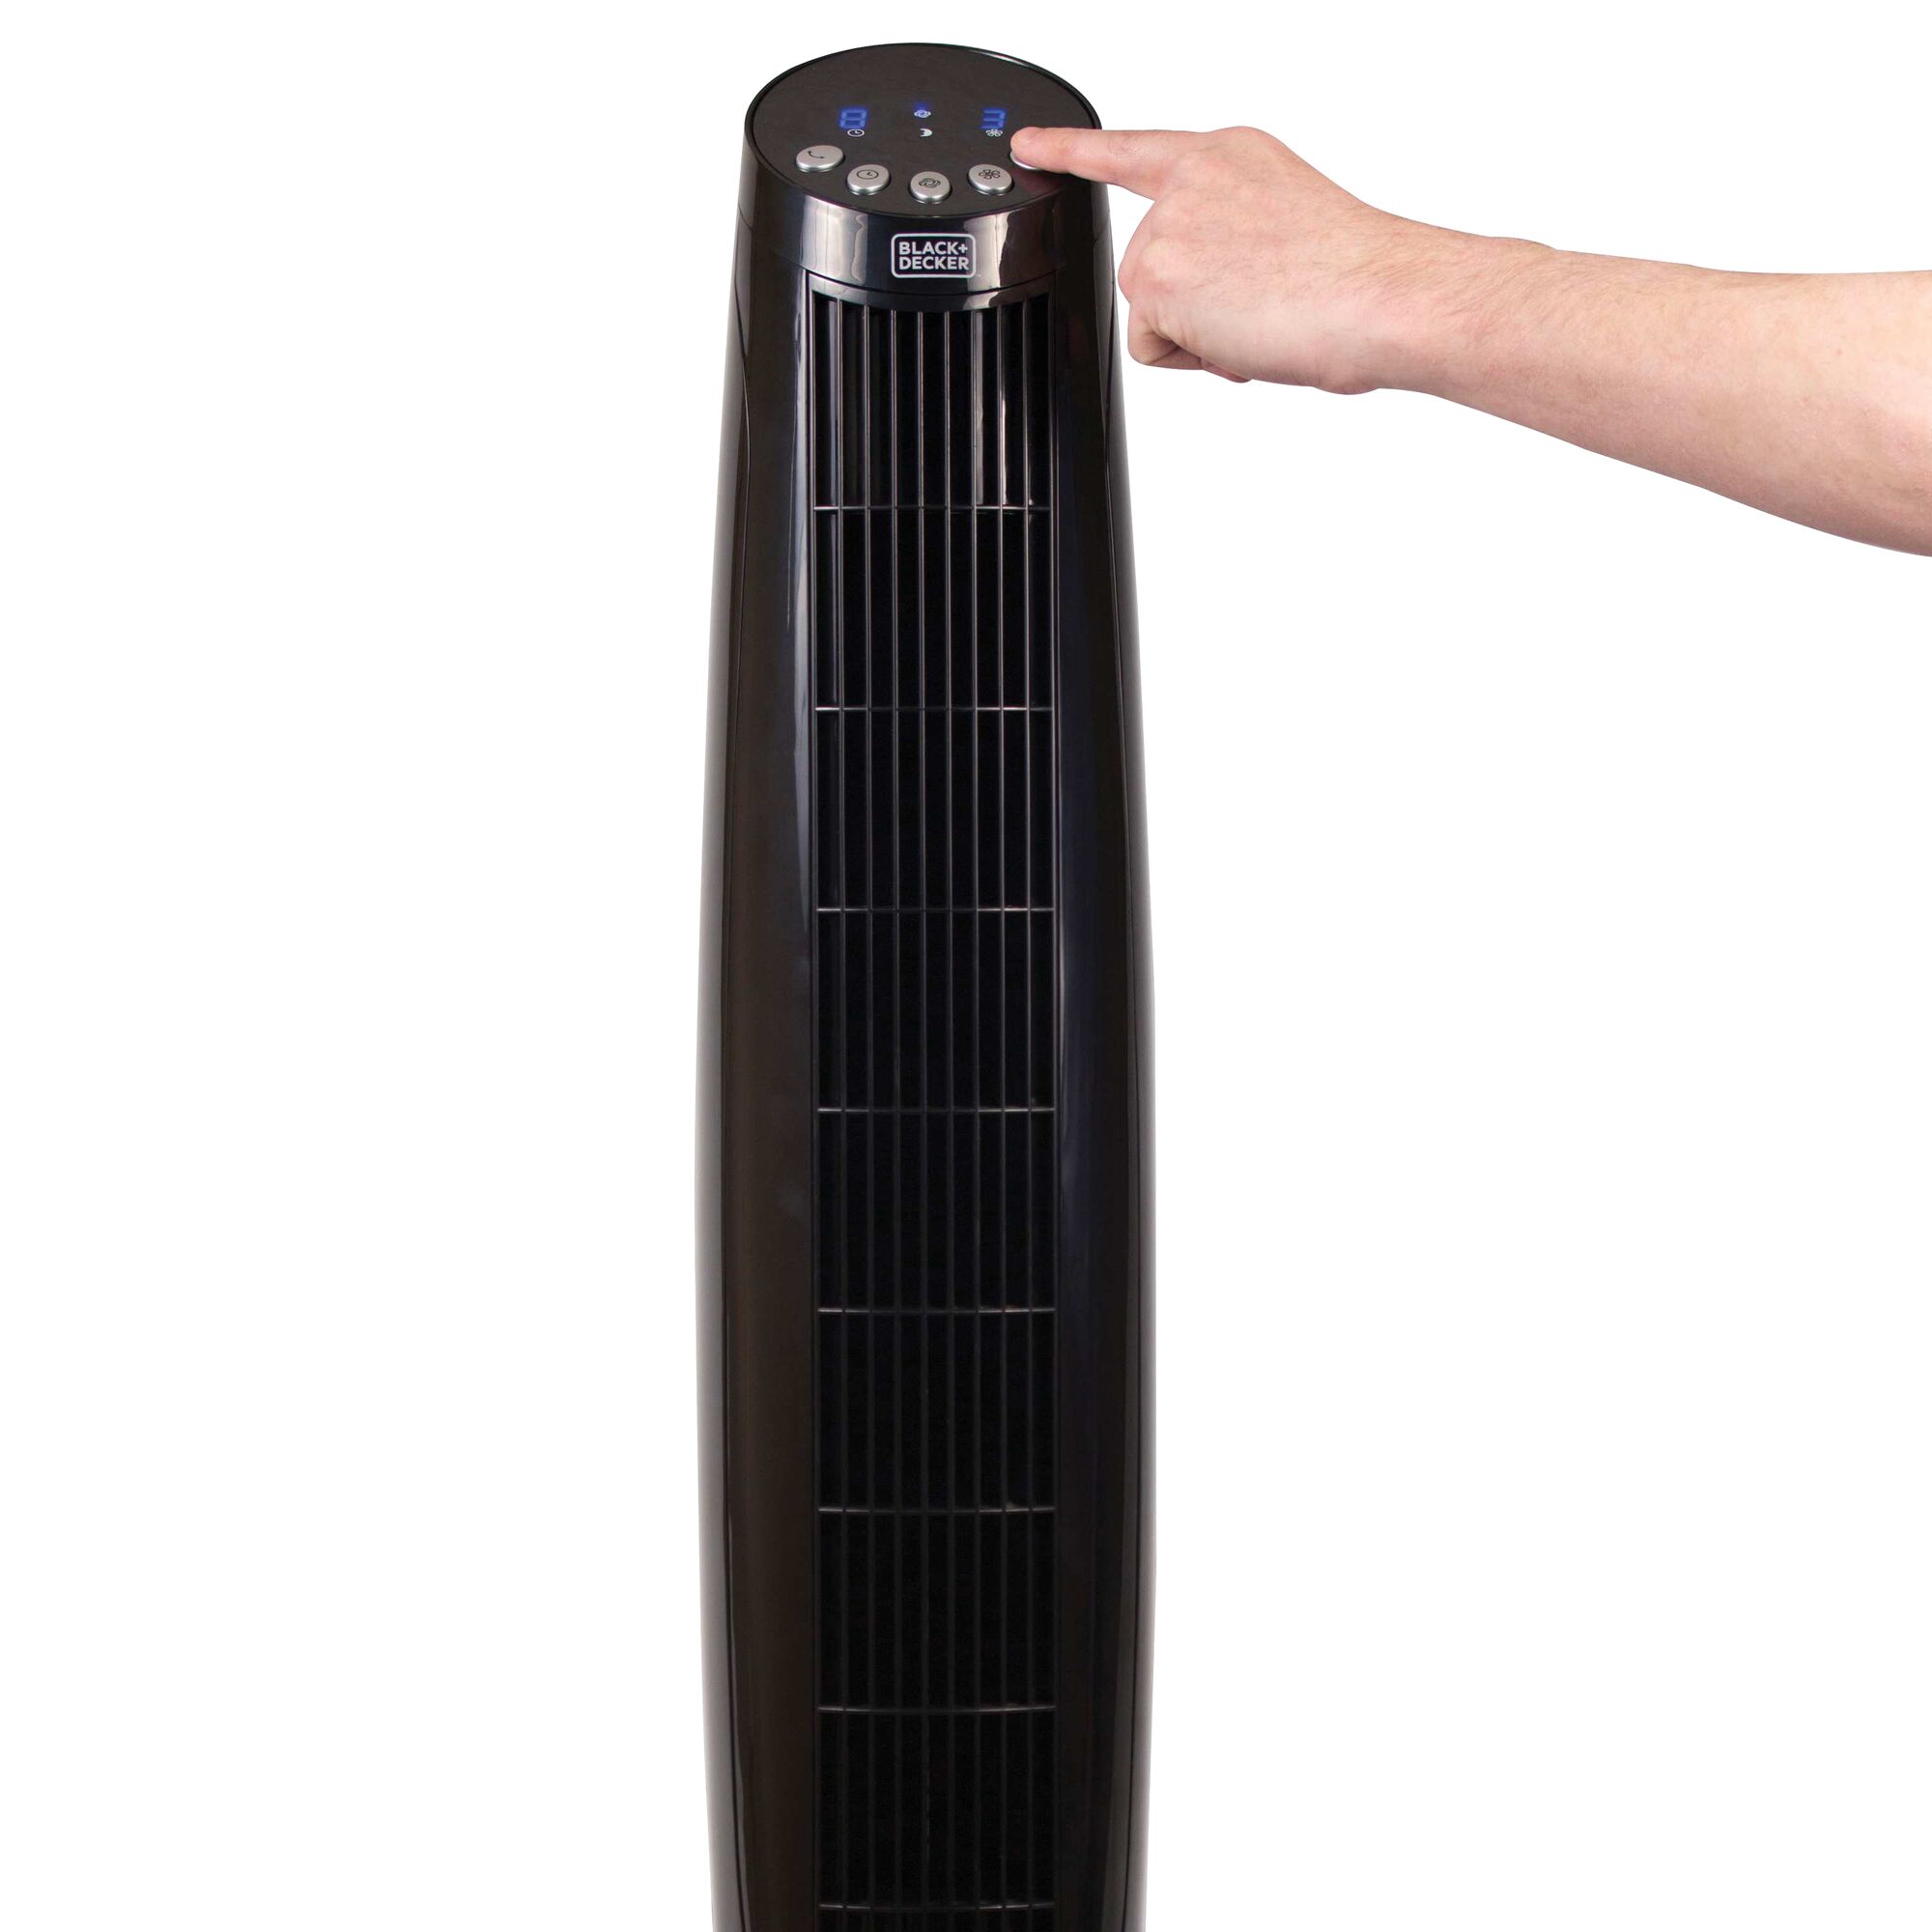 36 inch digital tower fan with remote being used by a person.